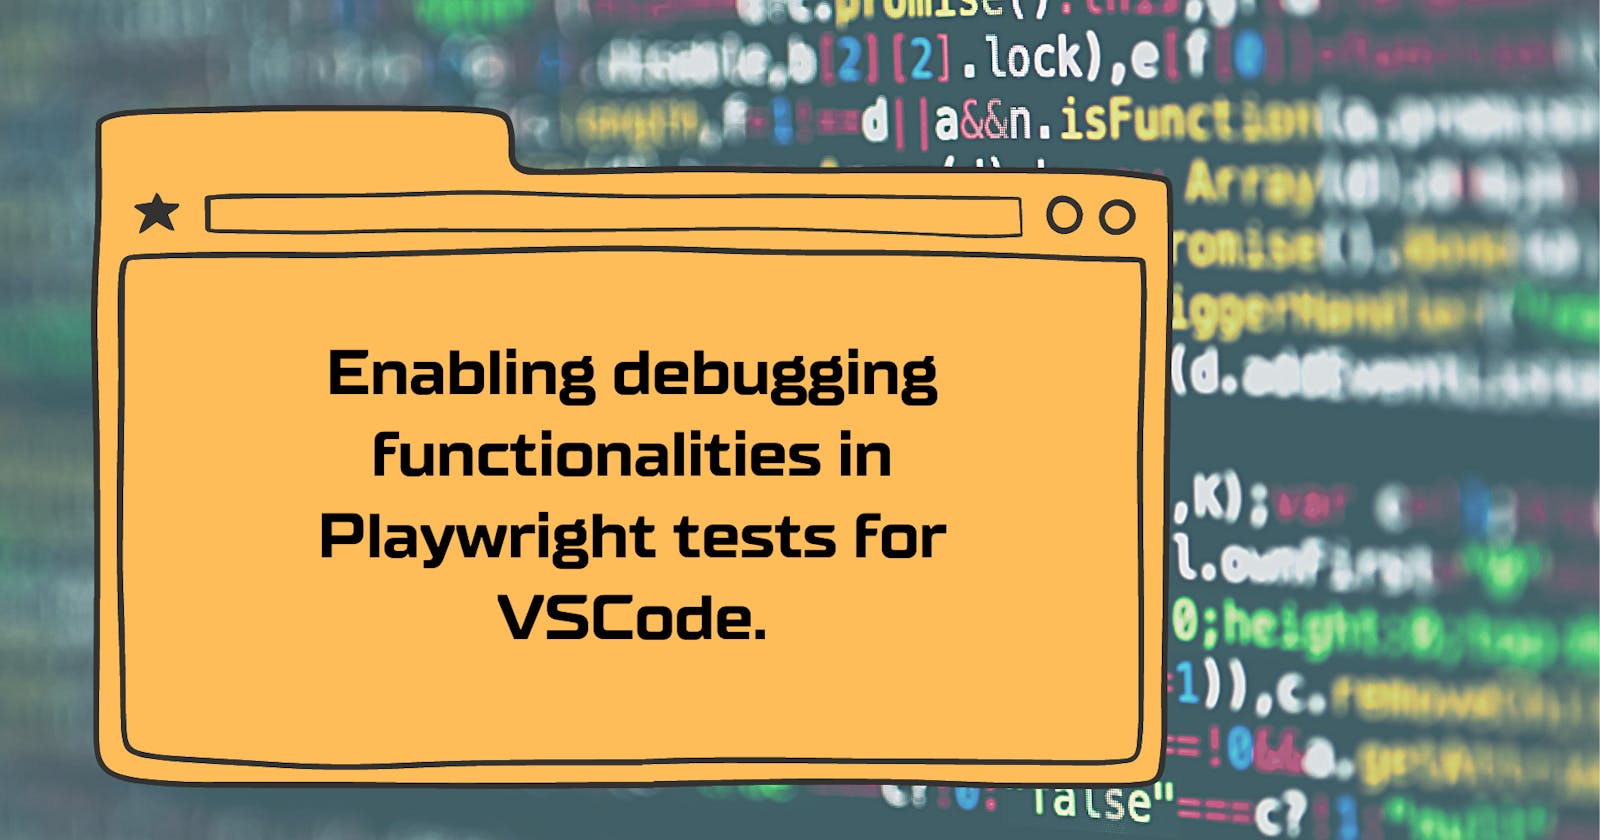 Enabling debugging functionalities in Playwright tests for VSCode.